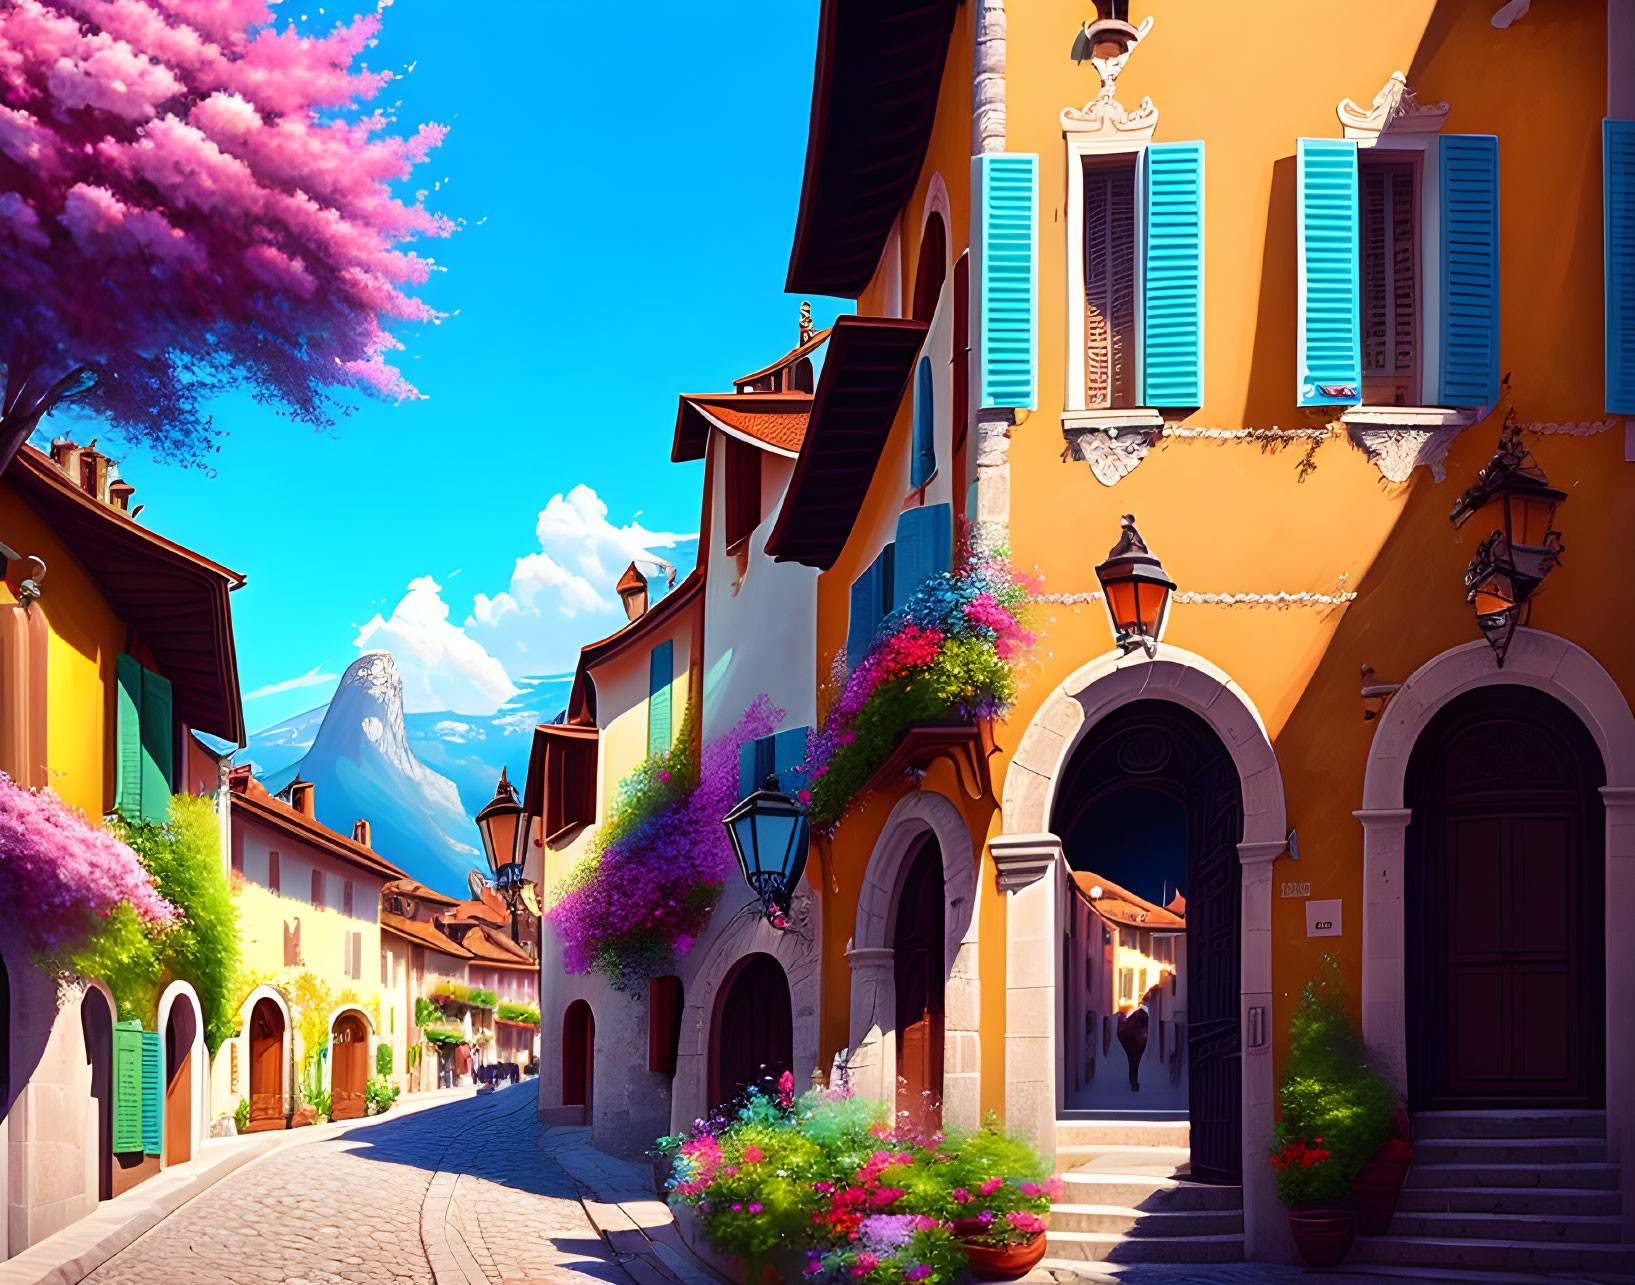 Vibrant European alley with colorful buildings, trees, and street lamps against mountain backdrop.